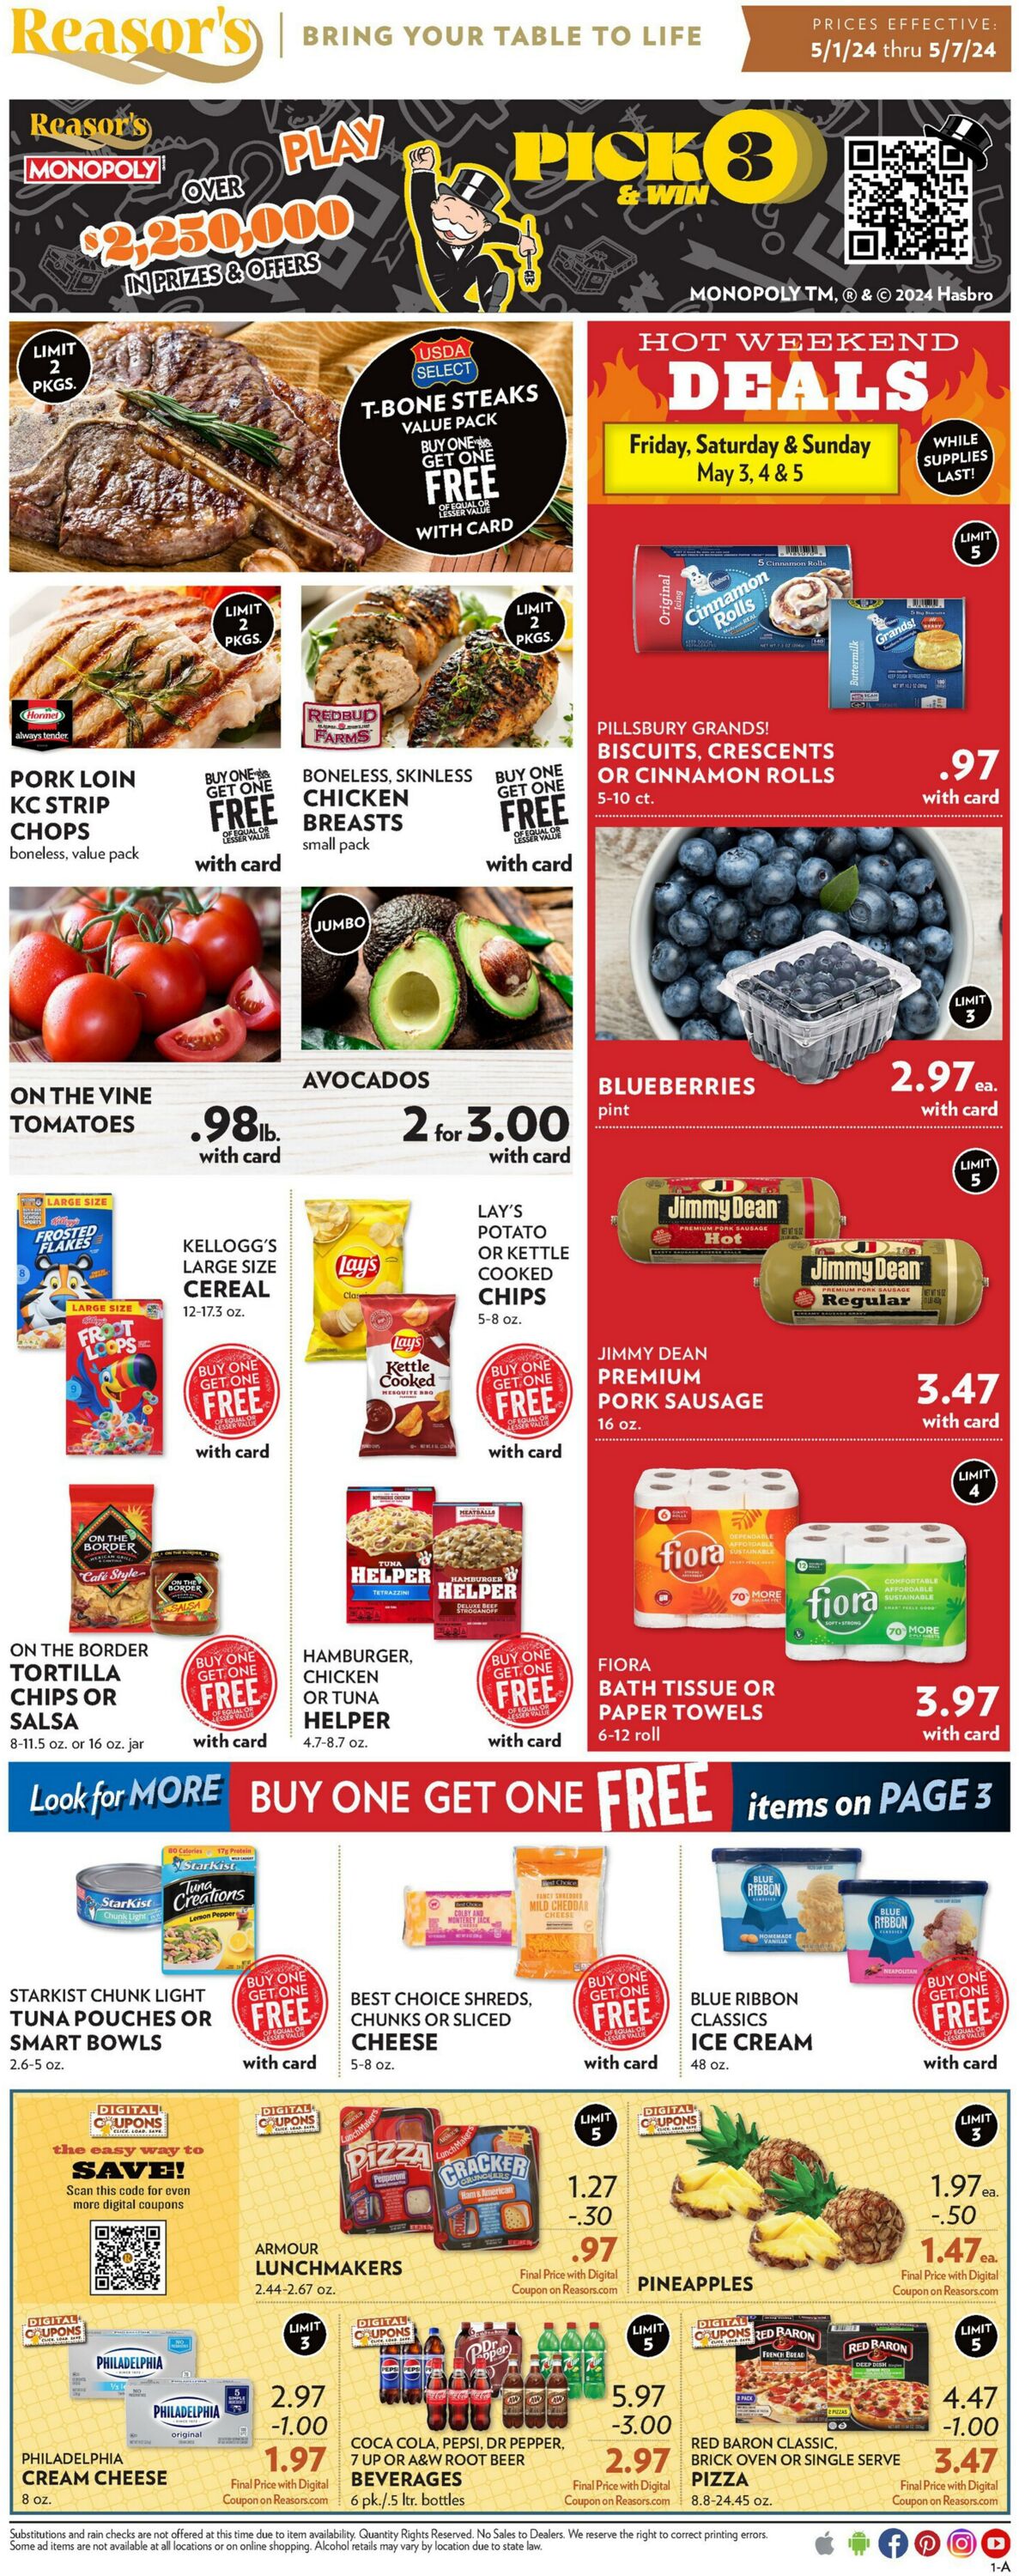 Reasor's Promotional weekly ads